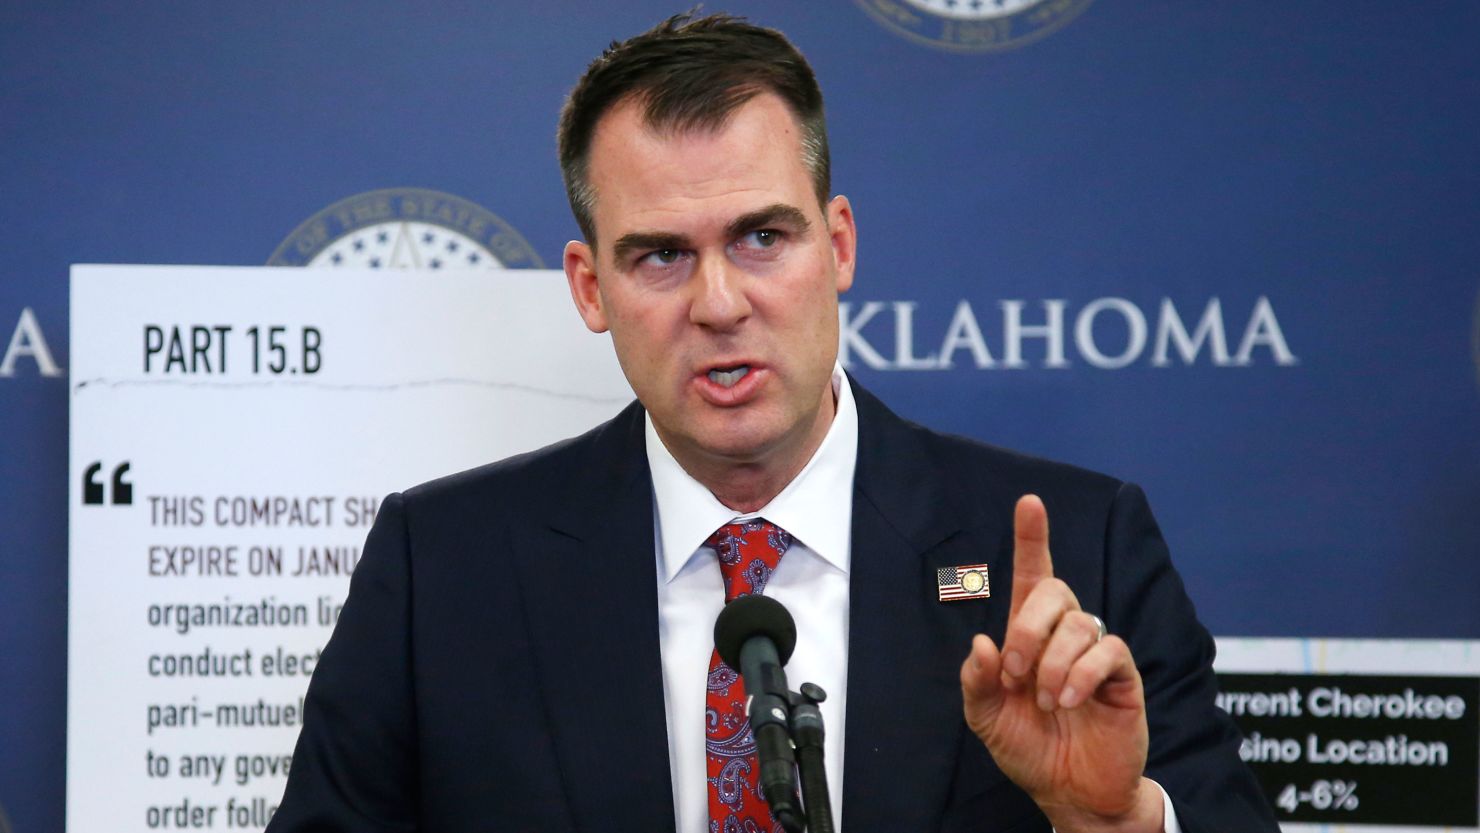 Oklahoma Gov. Kevin Stitt gestures during a news conference in Oklahoma City on December 17, 2019.